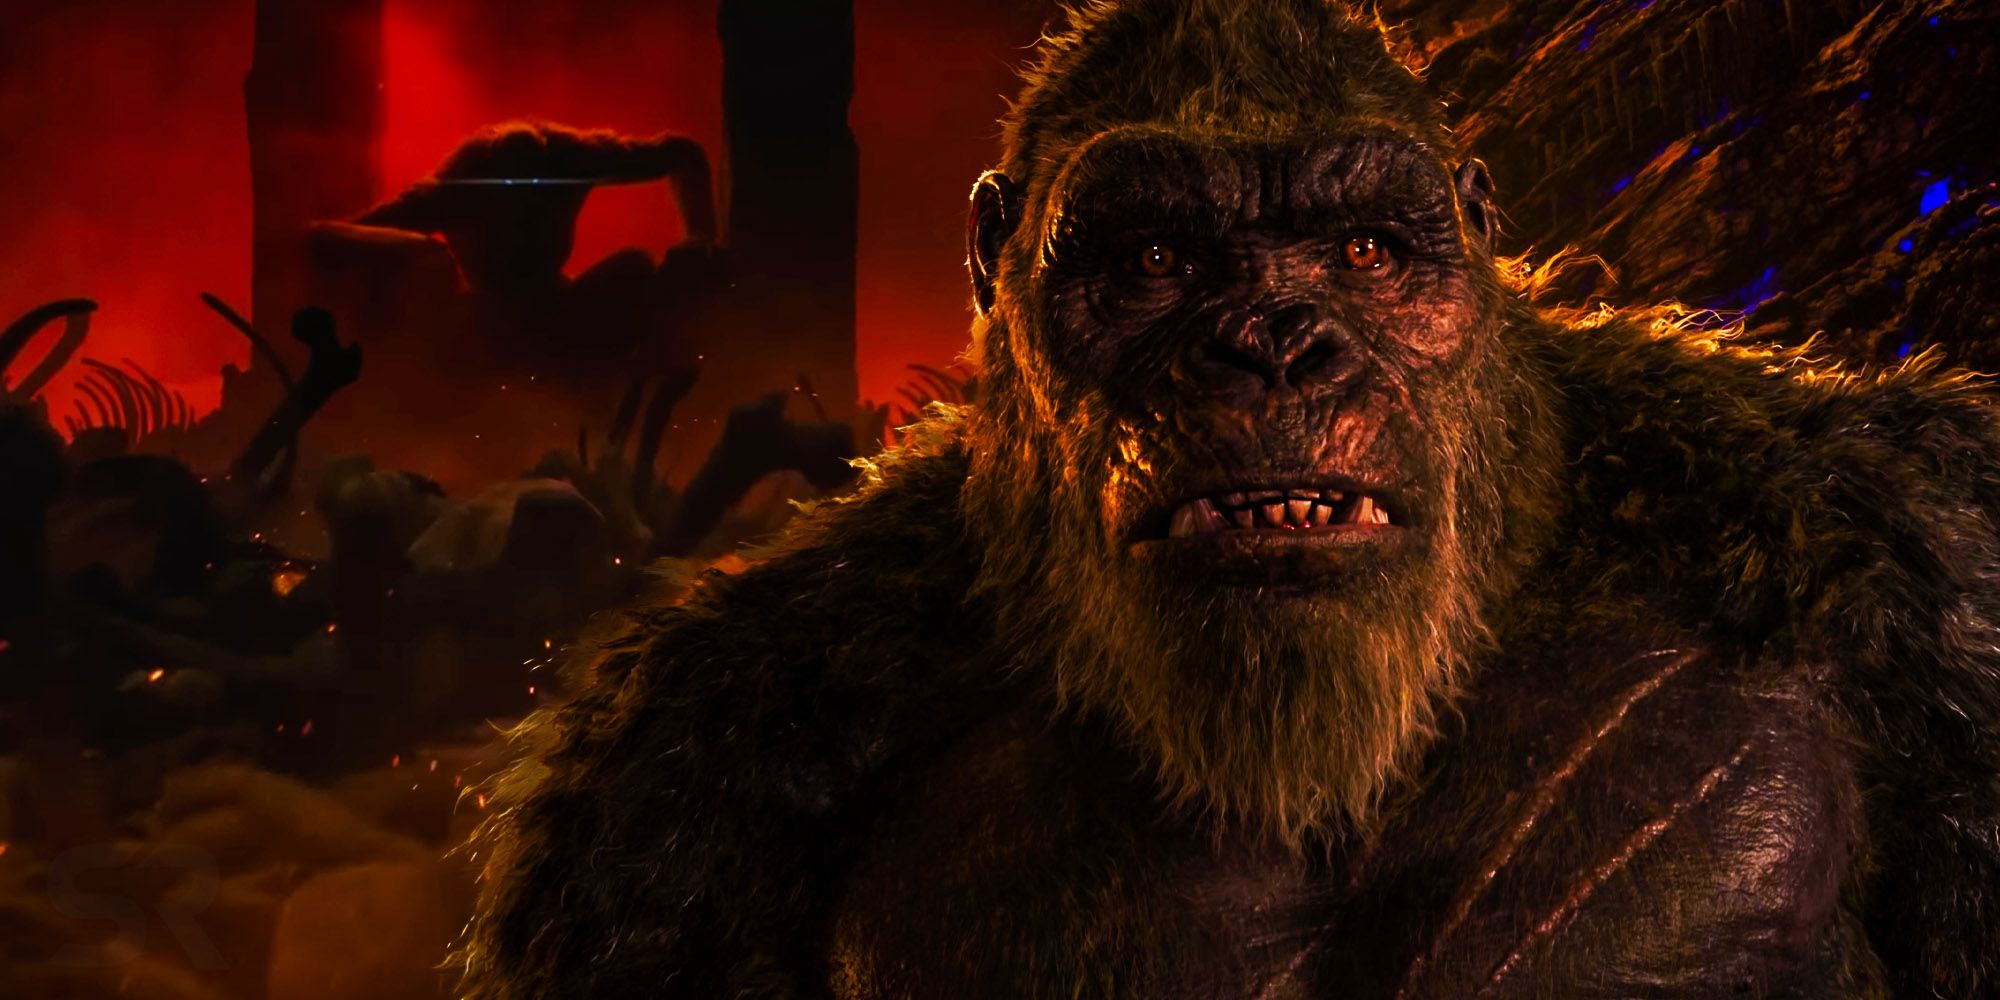 Godzilla x Kong: The New Empire wallpaper Resolution 2000x1000 | Best Download this awesome wallpaper - Cool Wallpaper HD - CoolWallpaper-HD.com